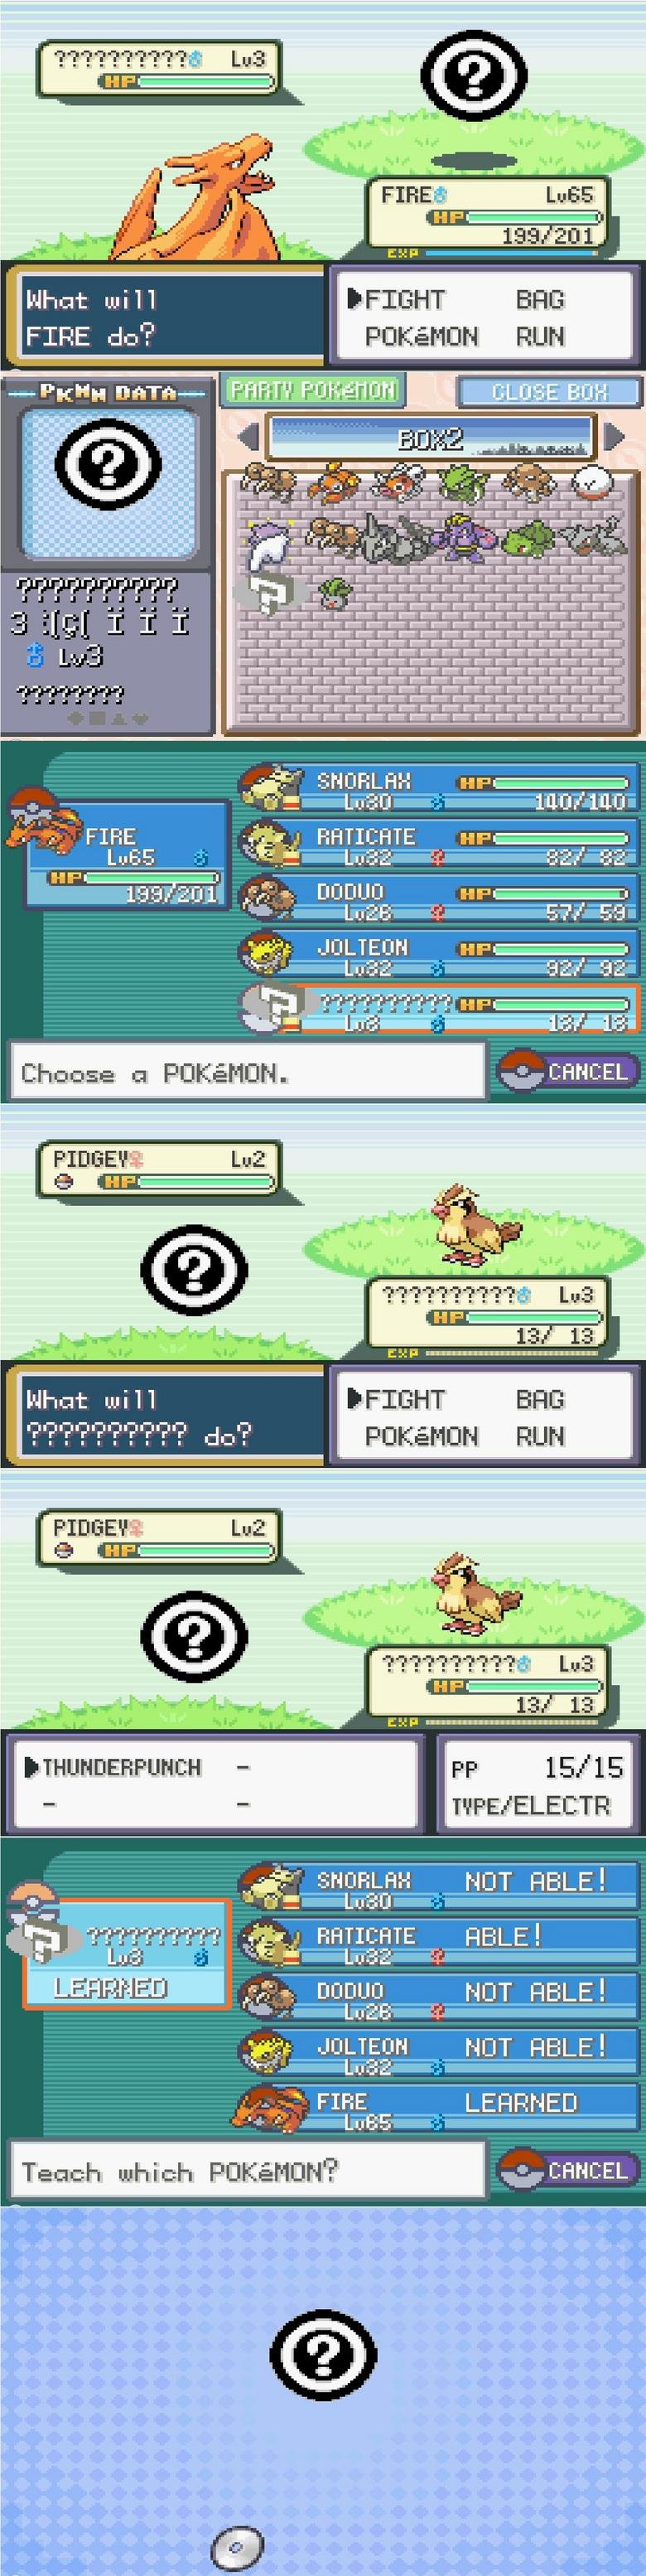 weird pokemon. i found this while playing fire red, i think its probably another missingno.. FIFE?‘ LUBE Fa, 201 ERG PC) KLIC) N RUN m, ERG Mif _ panama“ RUN 13